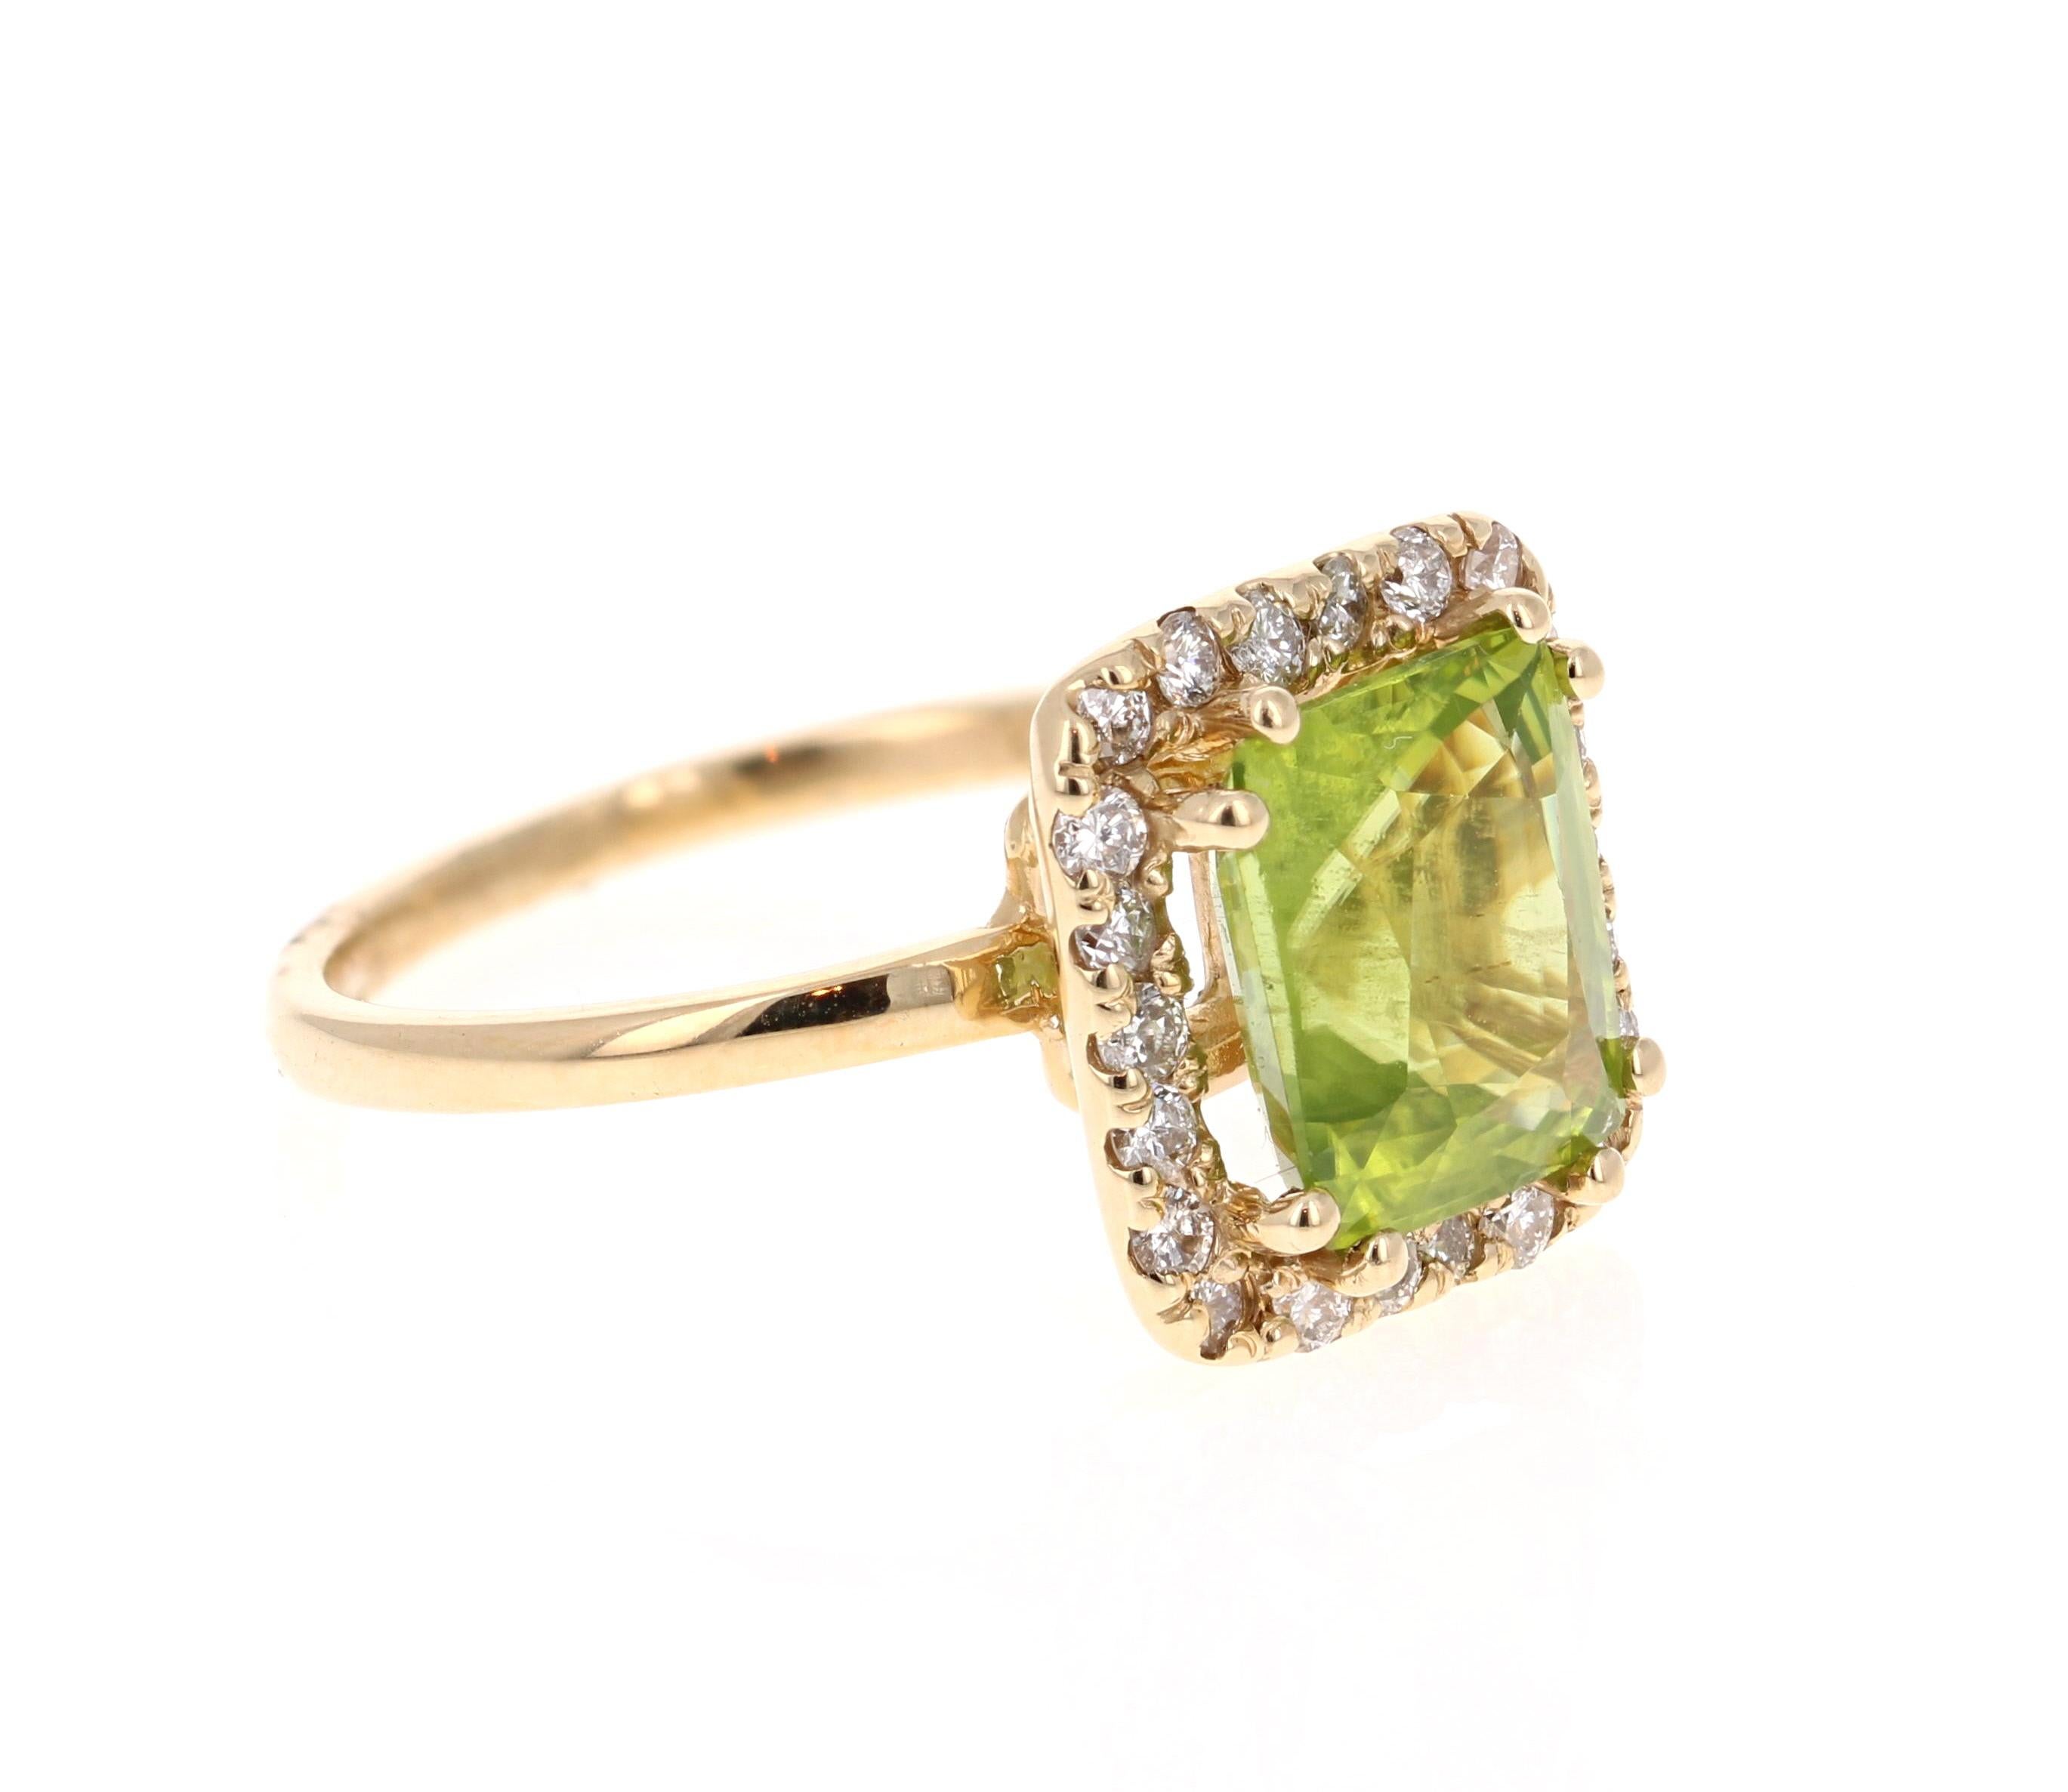 This Peridot and Diamond Ring has a 3.27 Carat Emerald Cut Peridot and has a halo of 22 Round Cut Diamonds weighing 0.40 Carats. The total carat weight of the ring is 3.67 Carats. 

It is set in 14 Karat Yellow Gold and weighs approximate 3.8 grams.